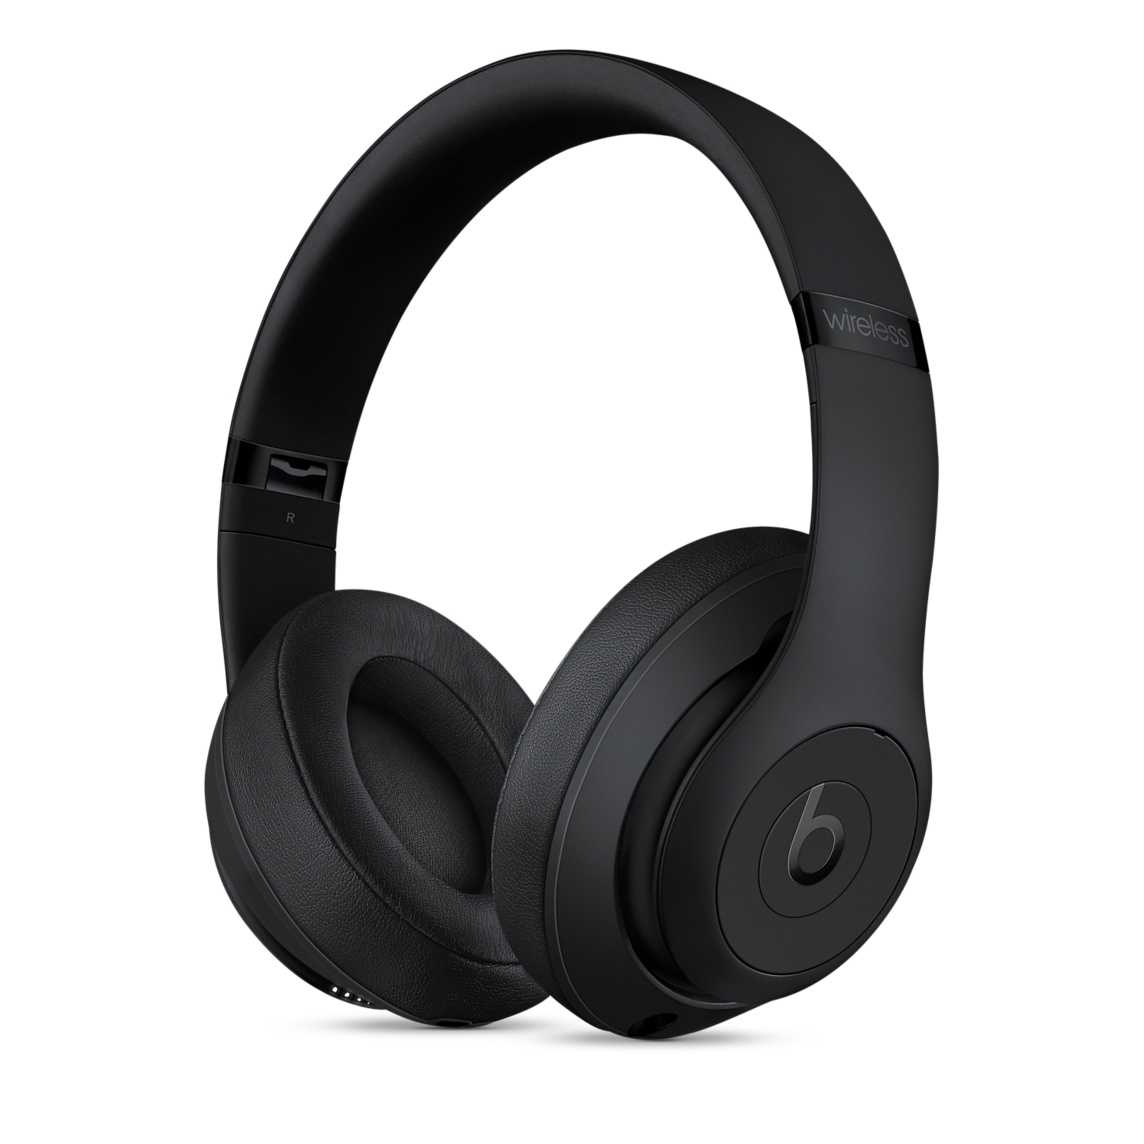 Apple releasing a new Studio3 Wireless headphone with Pure ANC cover image